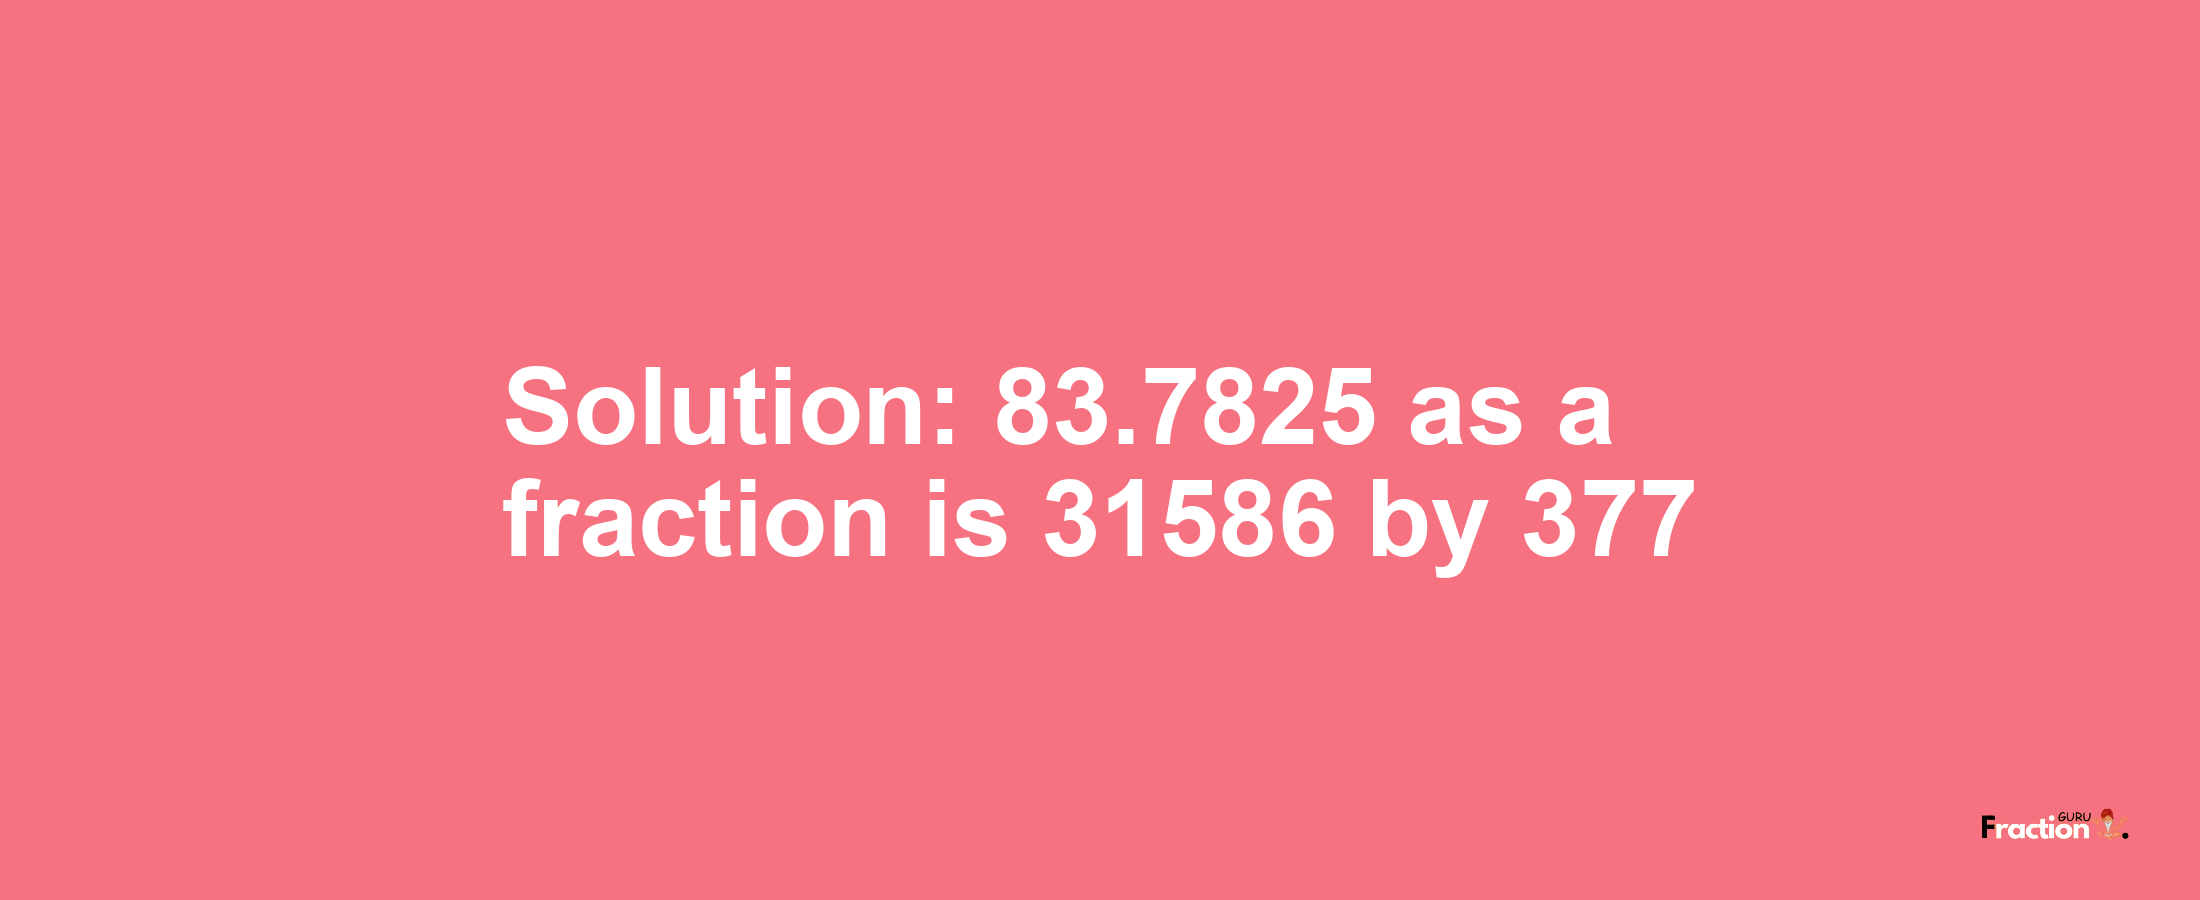 Solution:83.7825 as a fraction is 31586/377